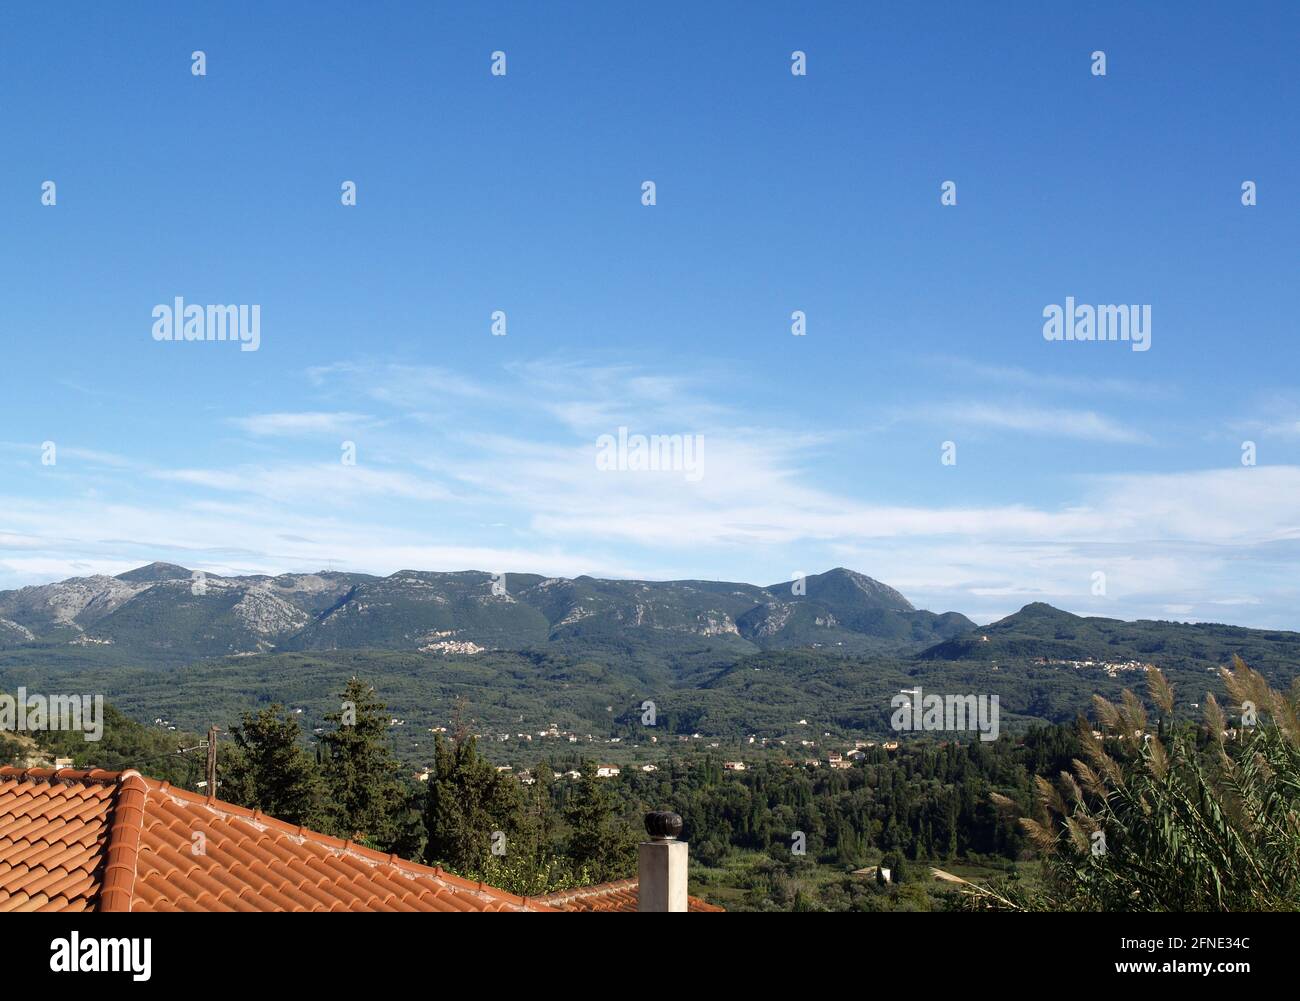 Olive groves, hills and mountains taken from Karousades, Corfu, Greece Stock Photo